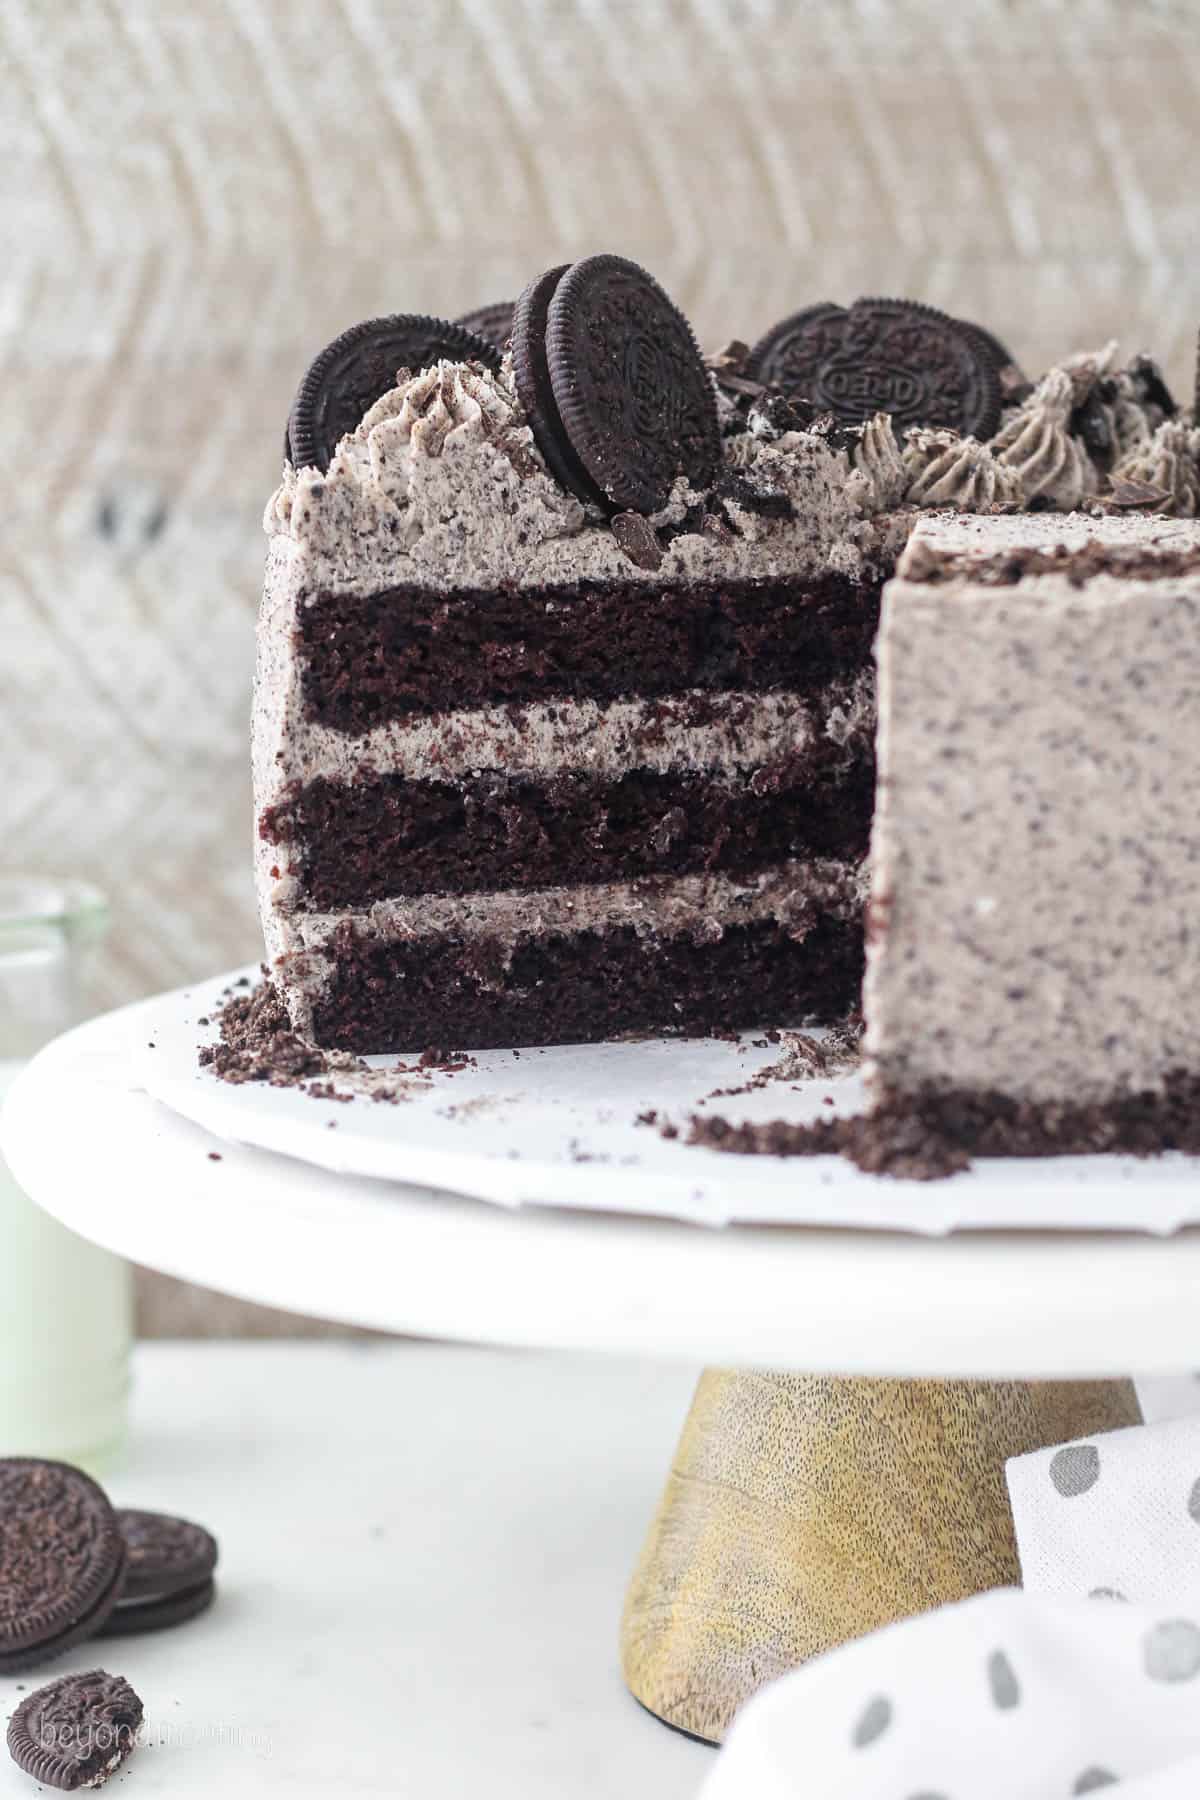 A frosted Oreo chocolate cake garnished with Oreo cookies on a cake stand, with a large slice missing.